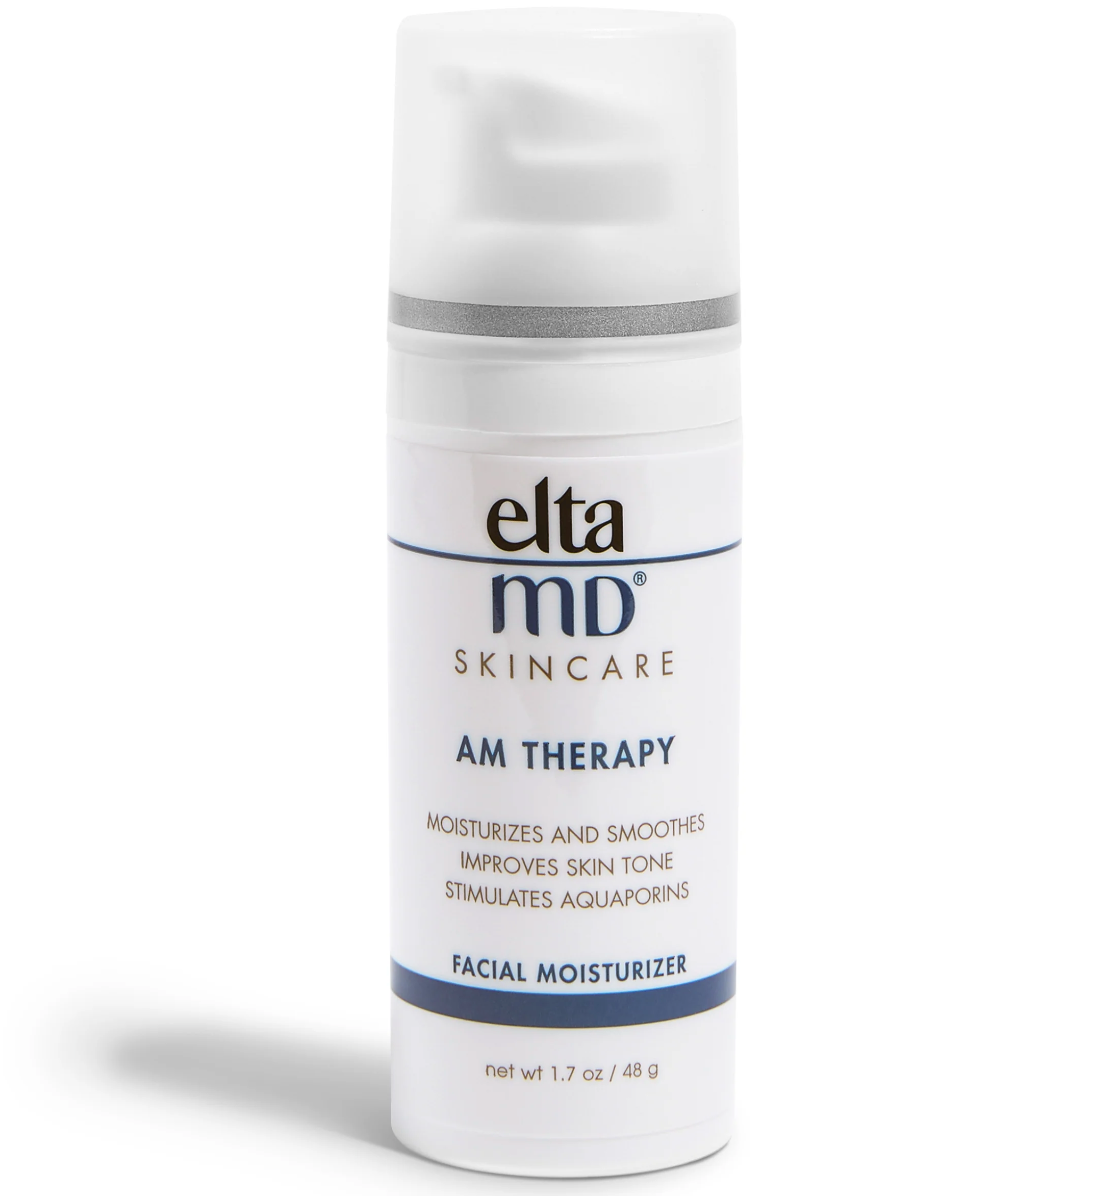 EltaMd AM Therapy Facial Moisturizer